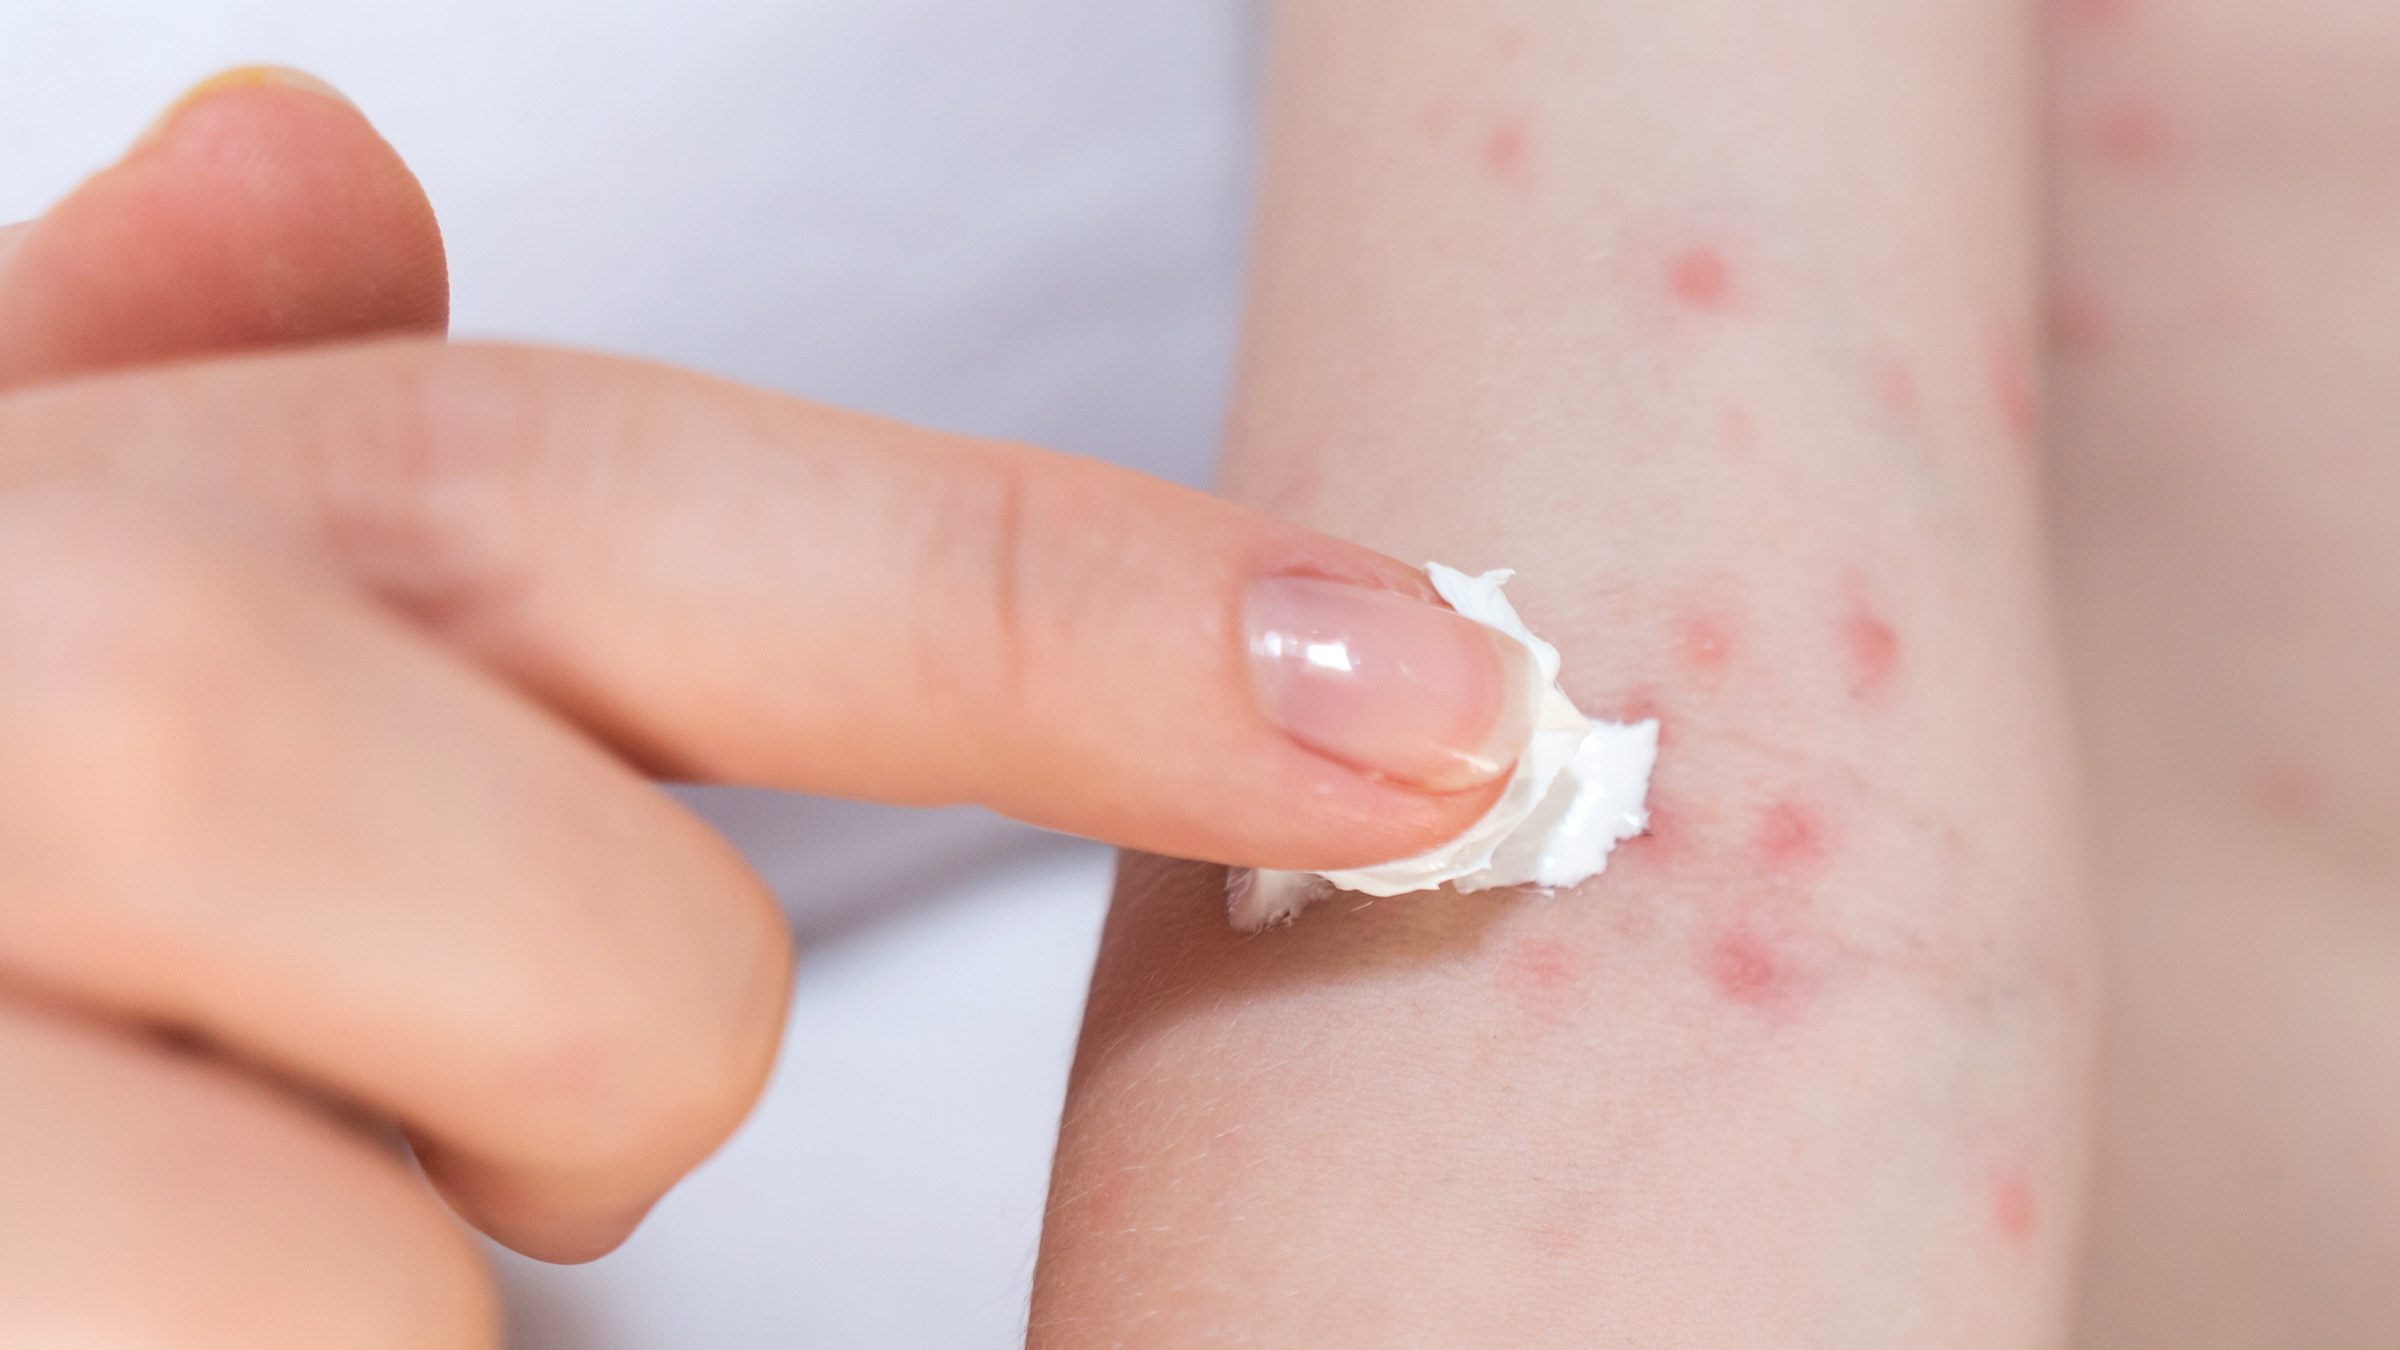 Contact Dermatitis Rash: This is Why You Frequently Have Rash